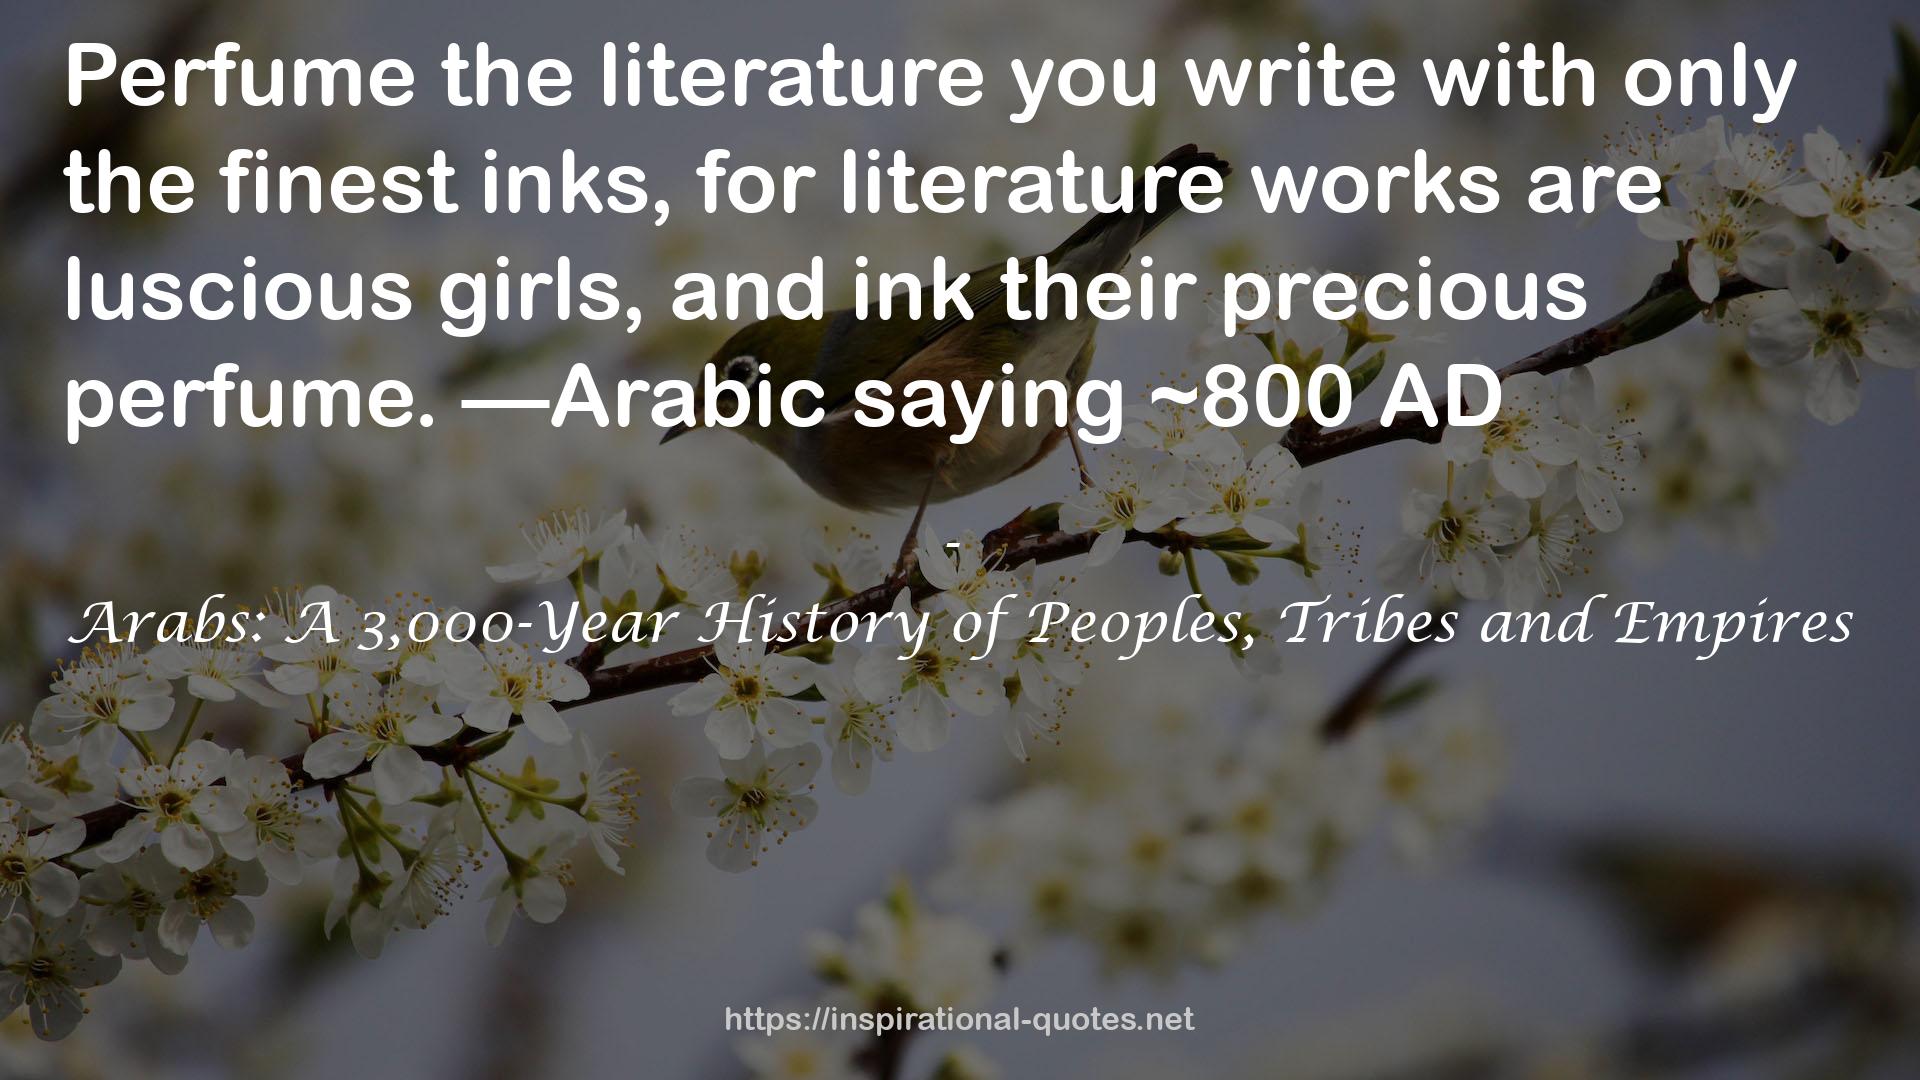 Arabs: A 3,000-Year History of Peoples, Tribes and Empires QUOTES